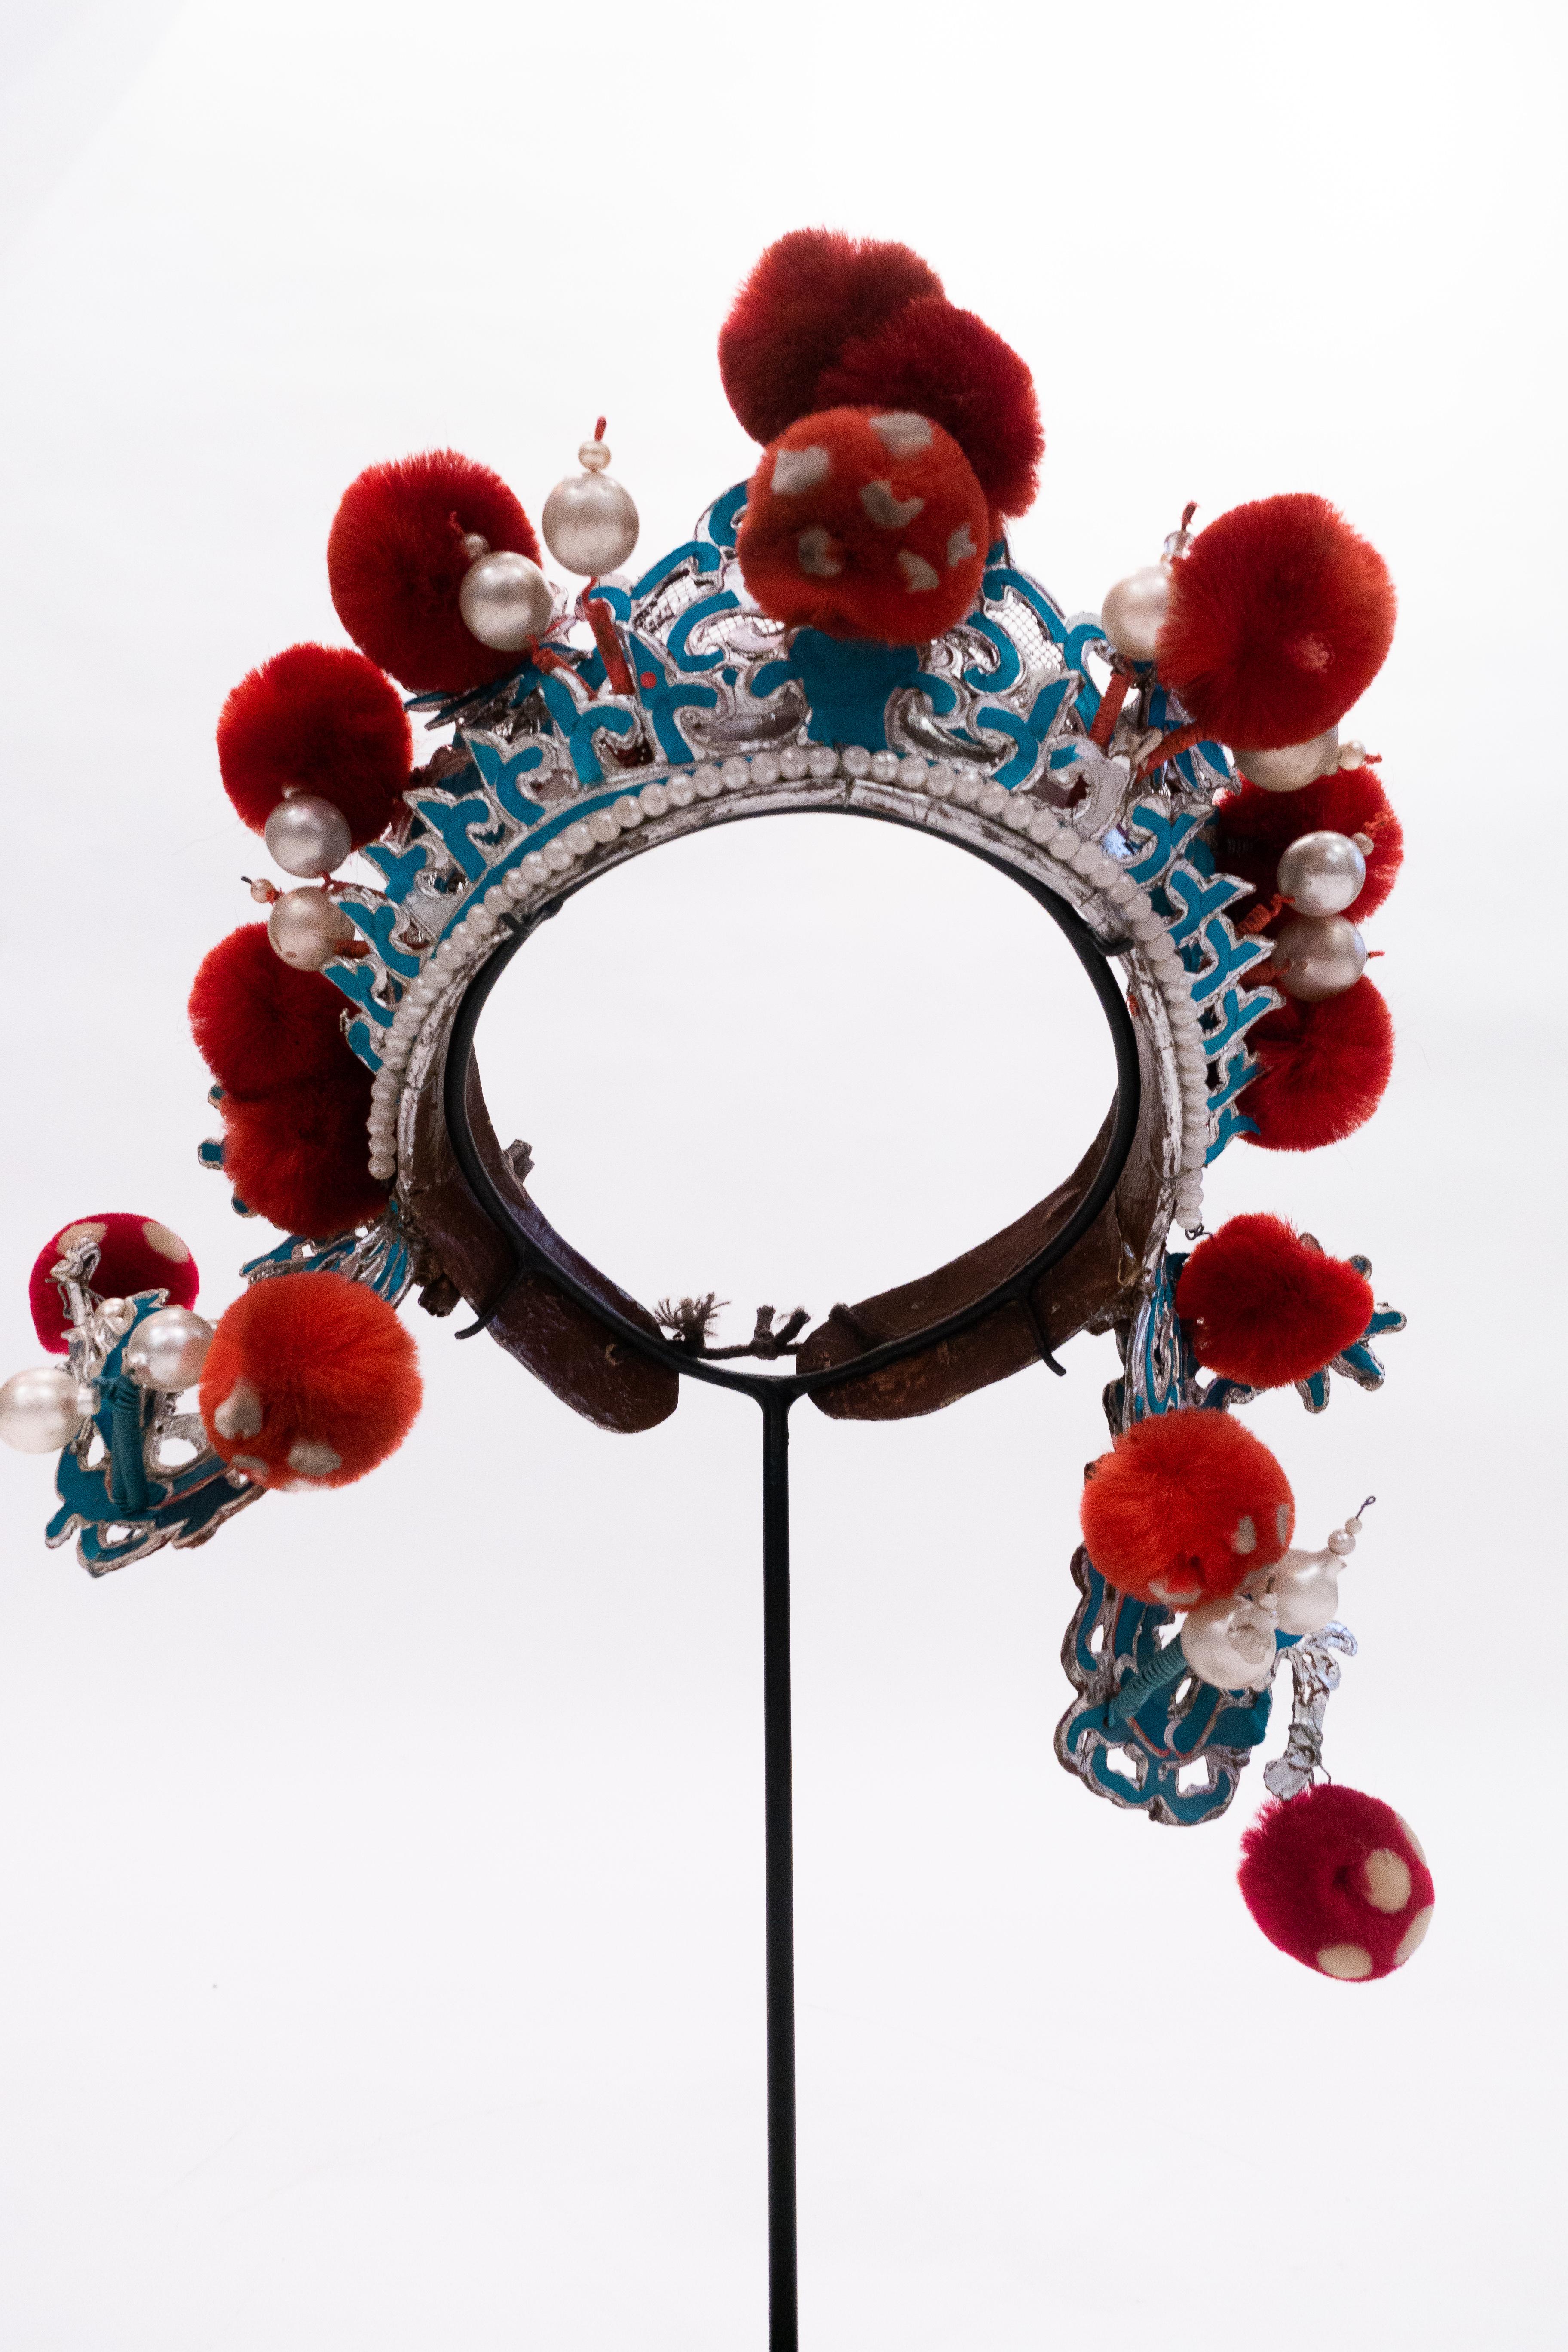 Antique Chinese Opera Theatre Headdress in Turquoise with Red Pom Poms im Zustand „Gut“ in New York, NY